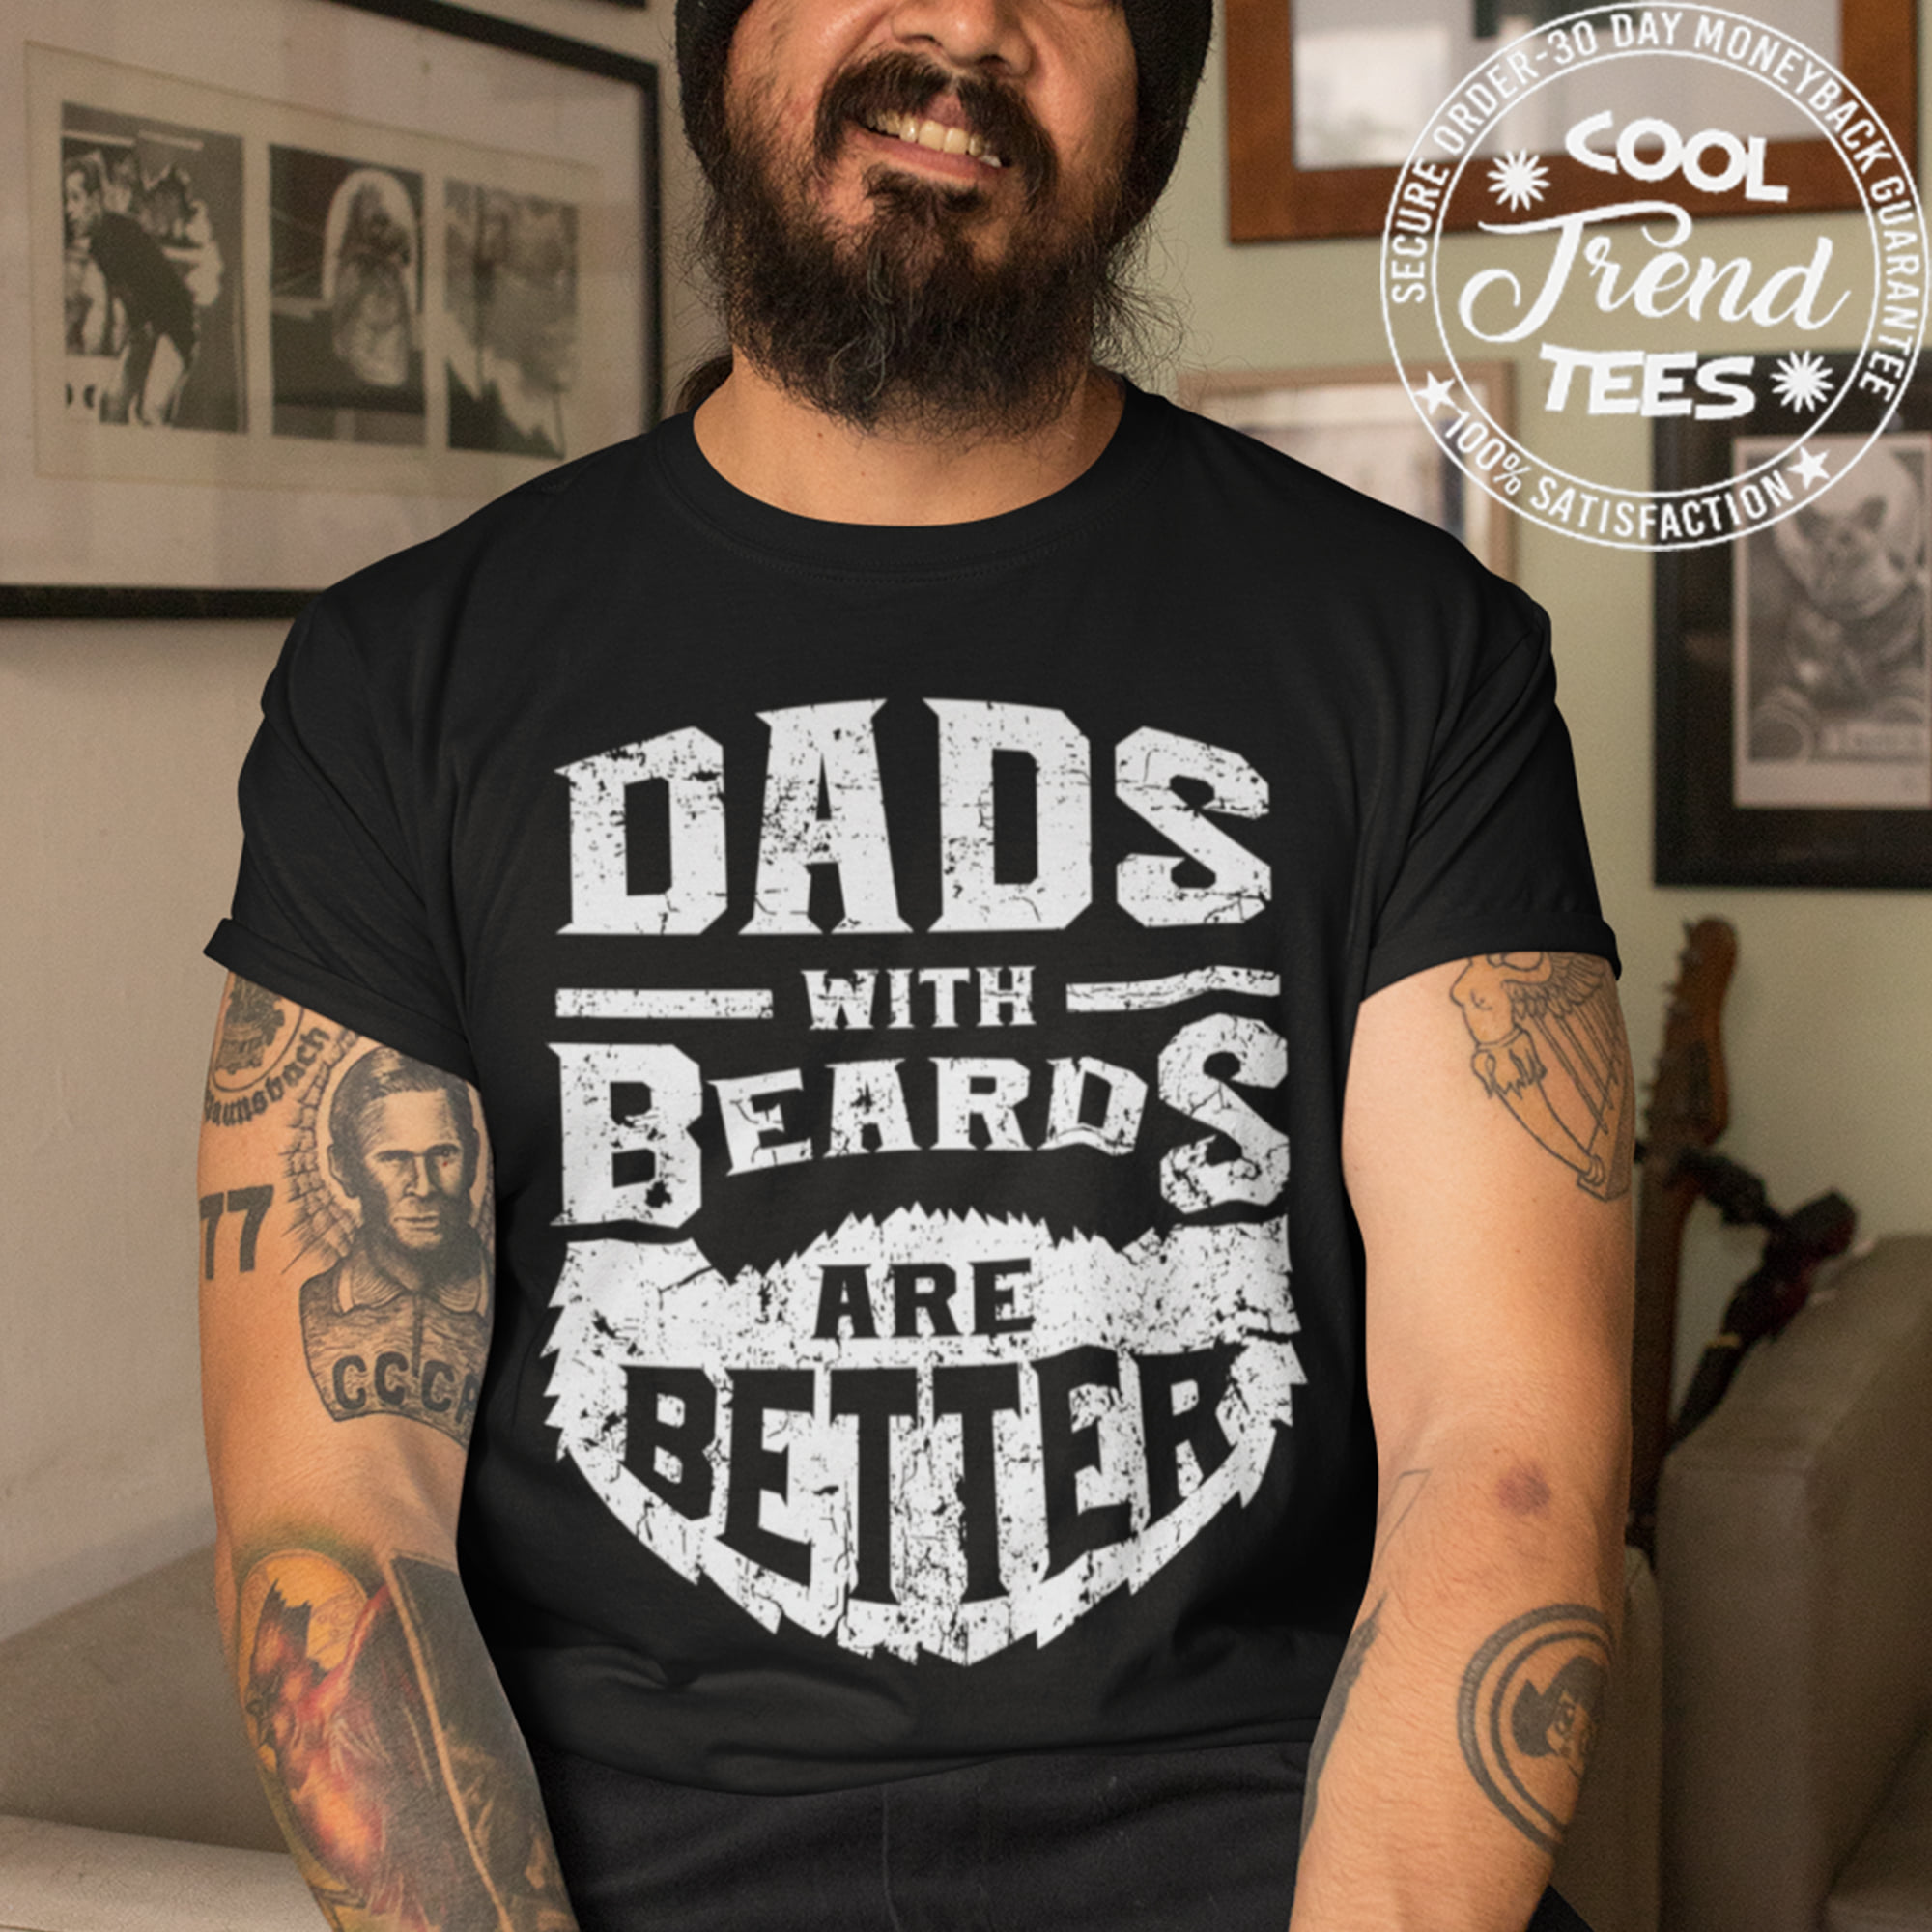 Dads with beards are better - Father's day gift